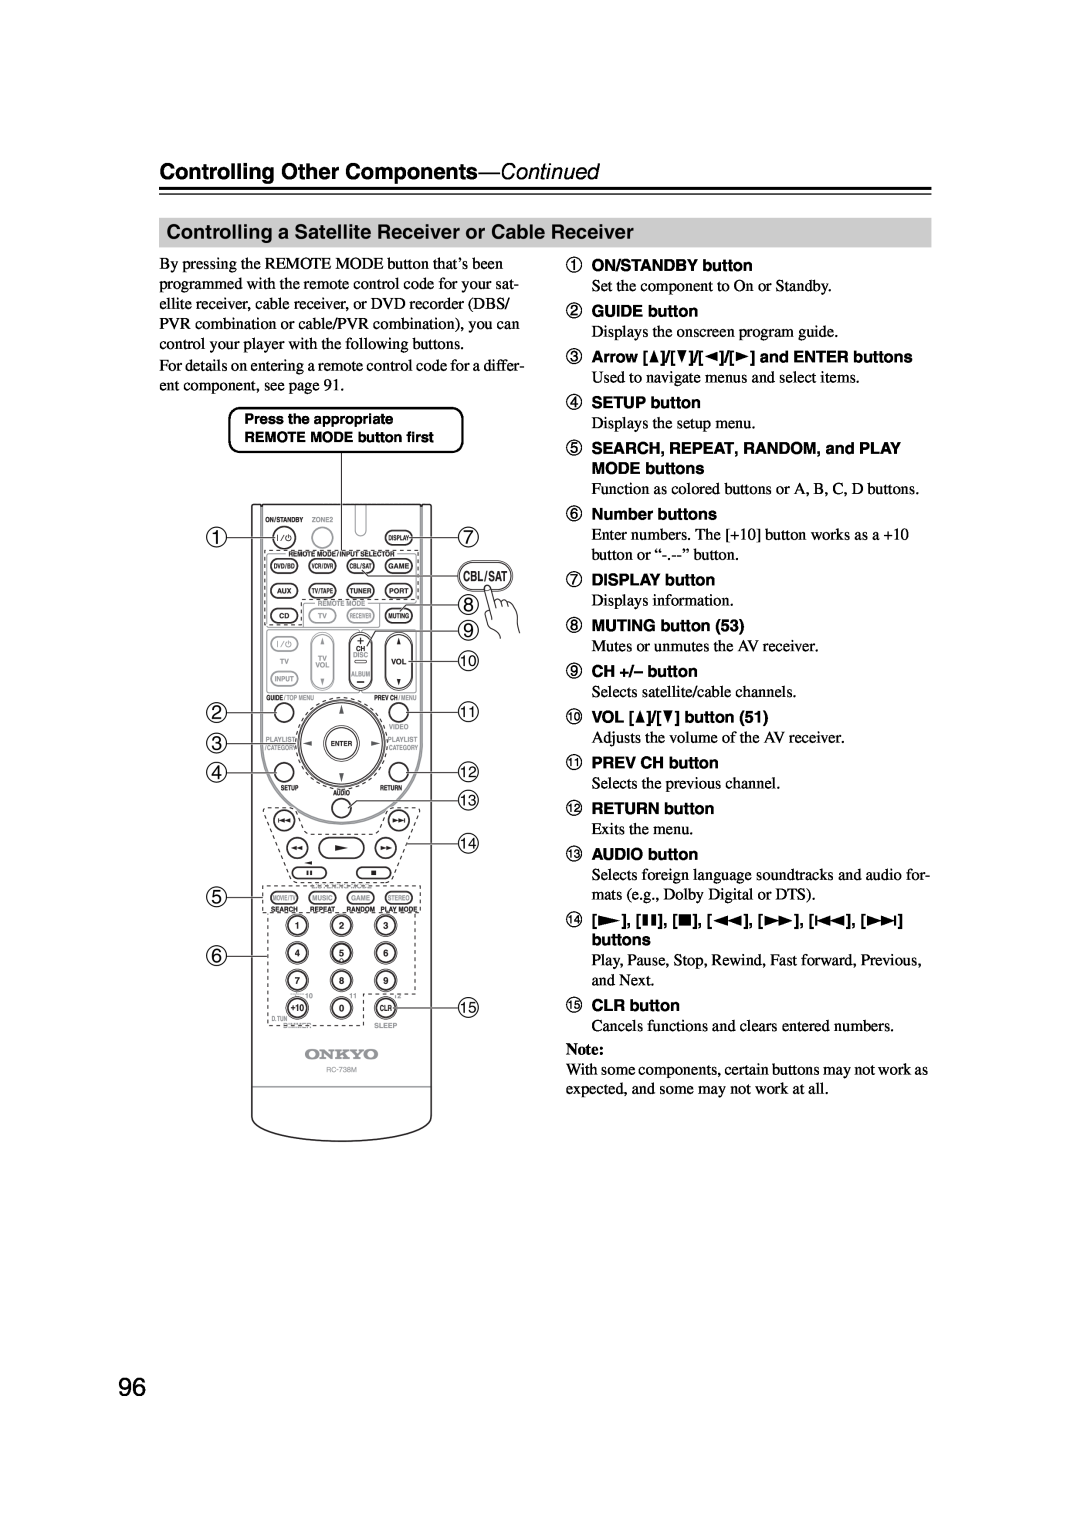 Onkyo SR607 instruction manual Controlling Other Components—Continued, aON/STANDBY button 